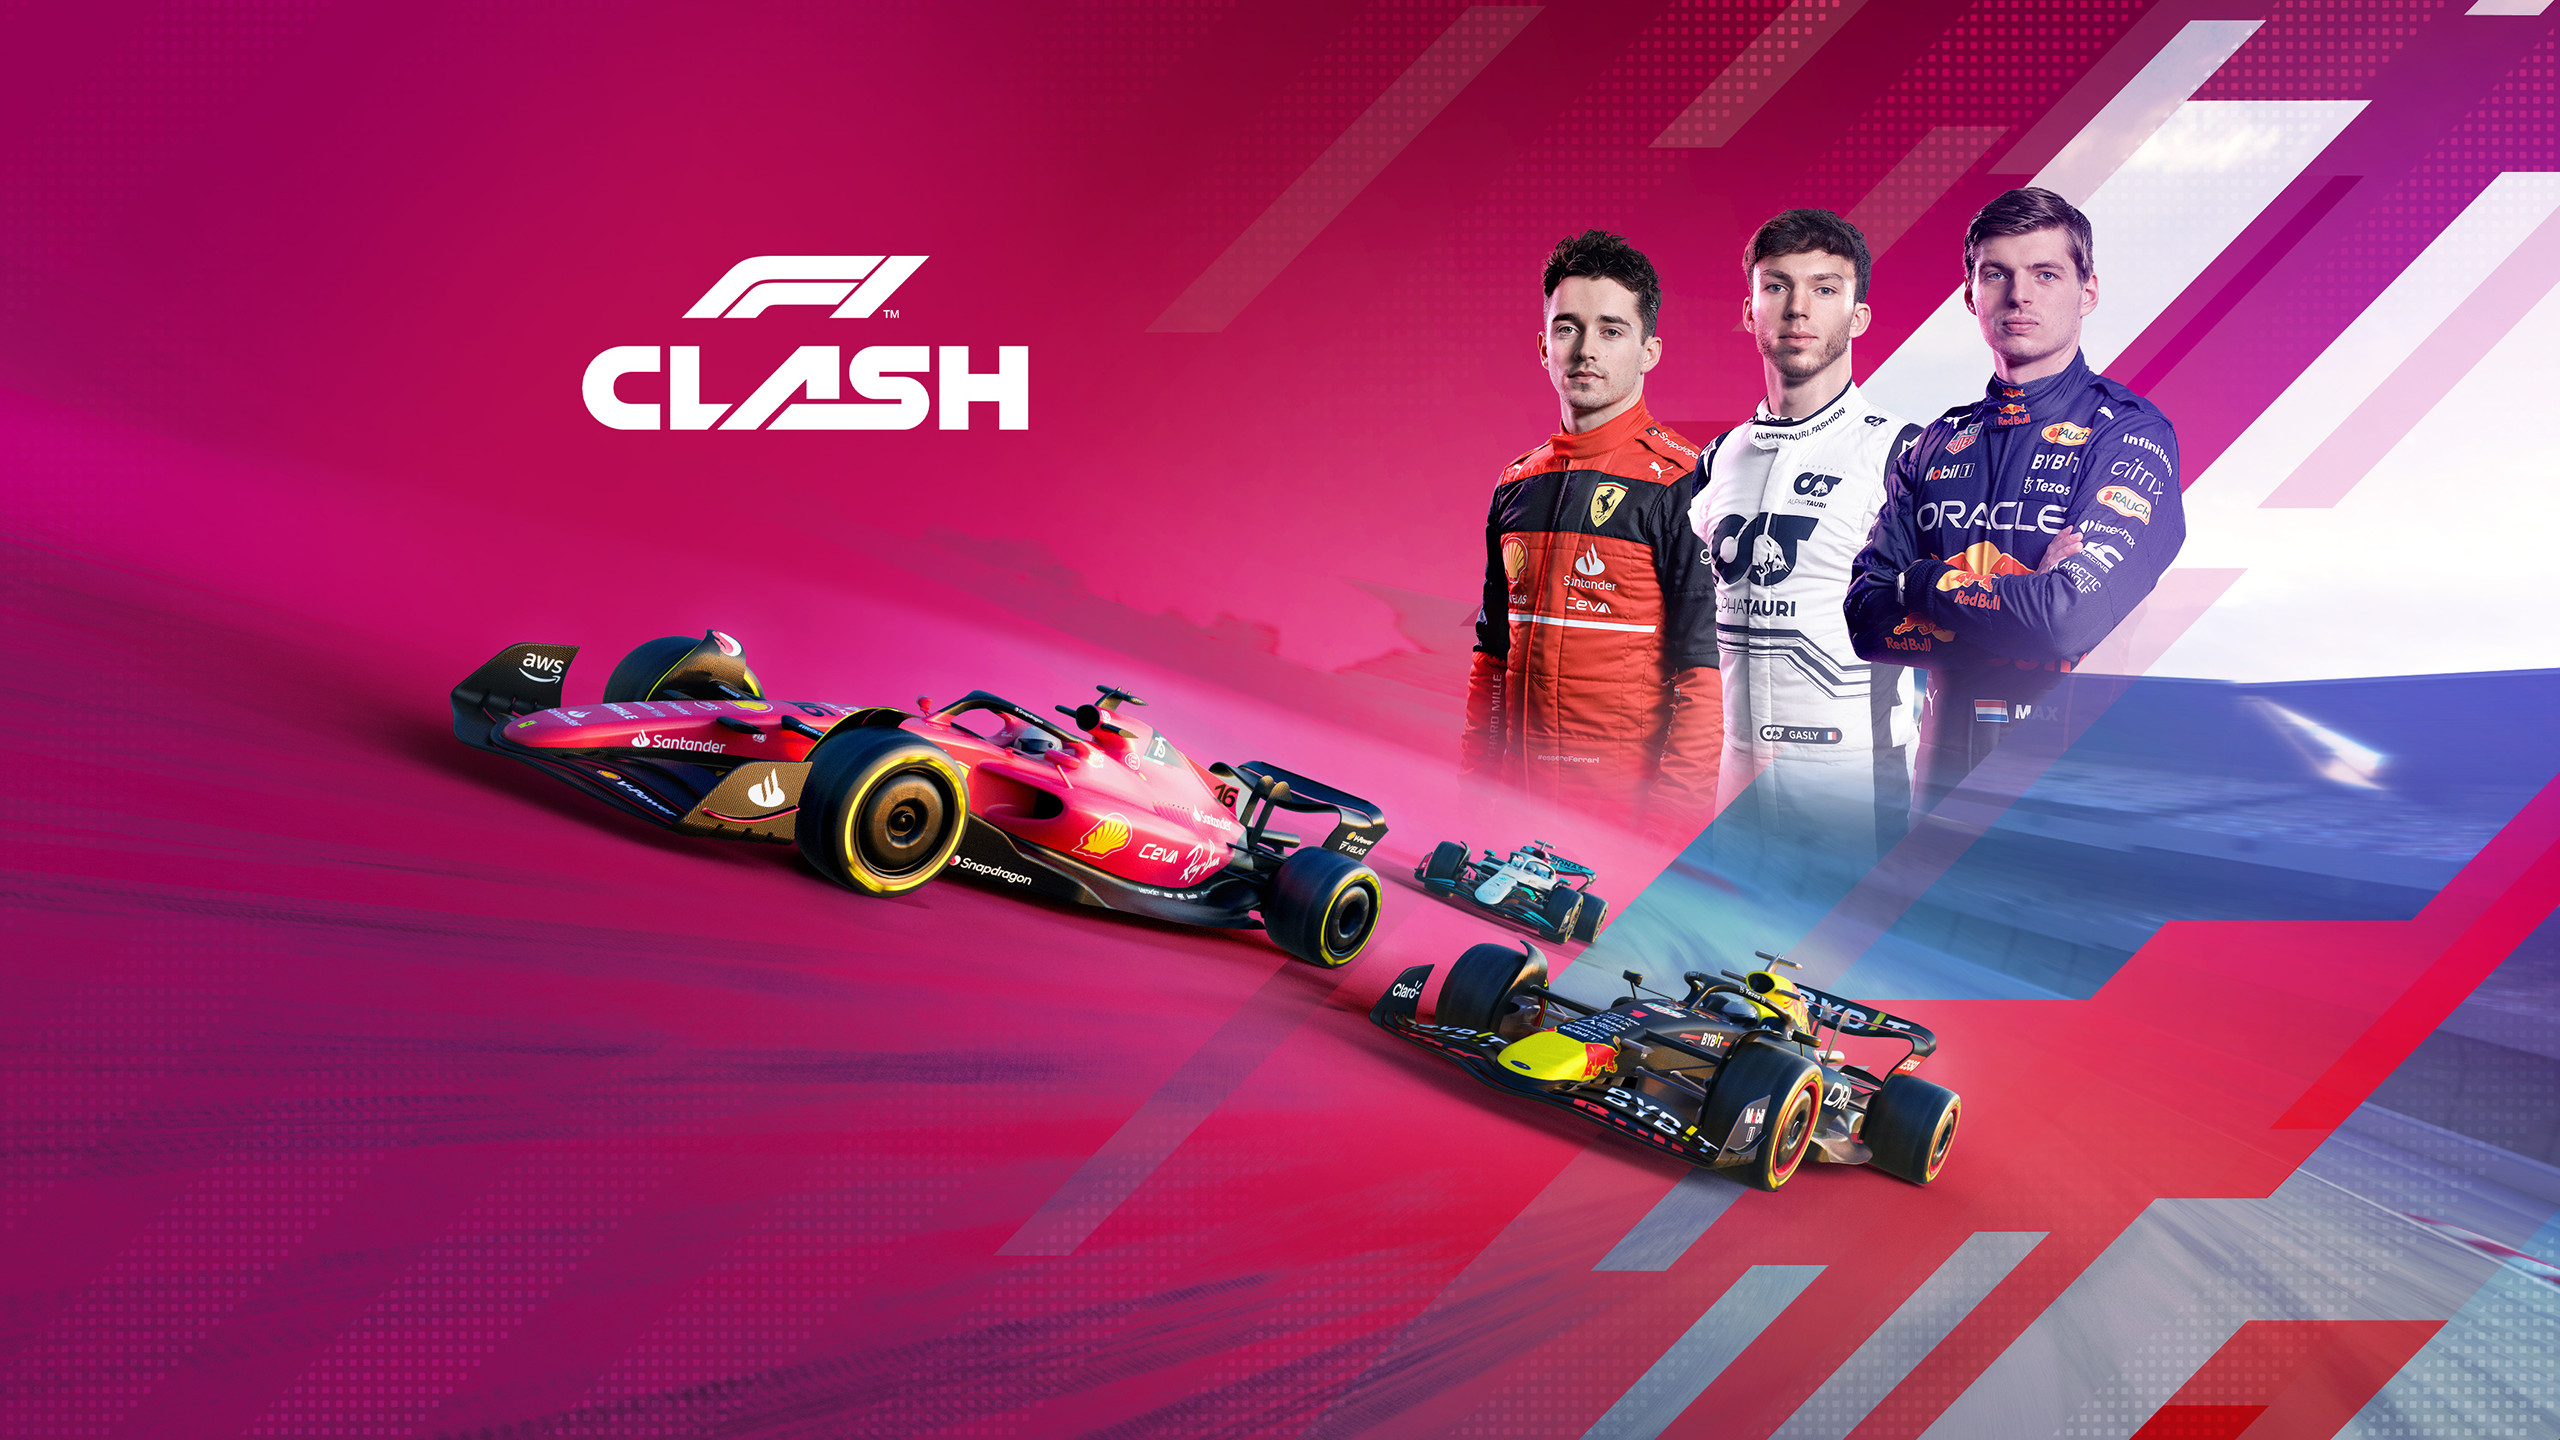 Render that ended up being used in the Key Art for the 2022 edition of F1 Clash